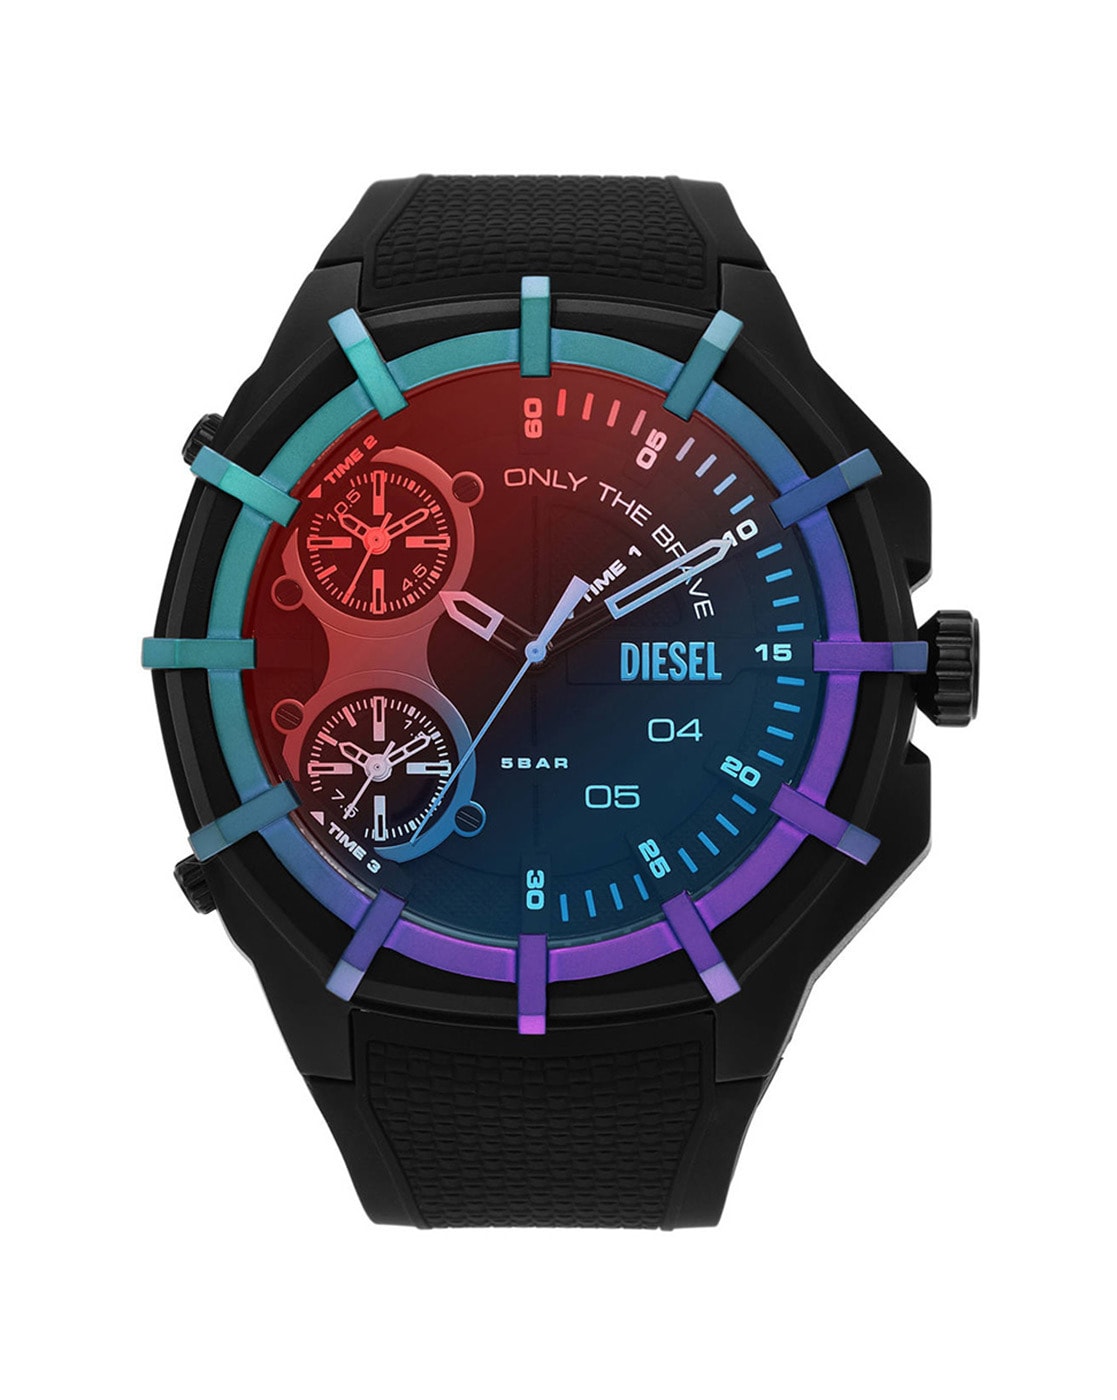 Diesel unveils Vert Collection which includes watches made using VR  technology - BusinessToday